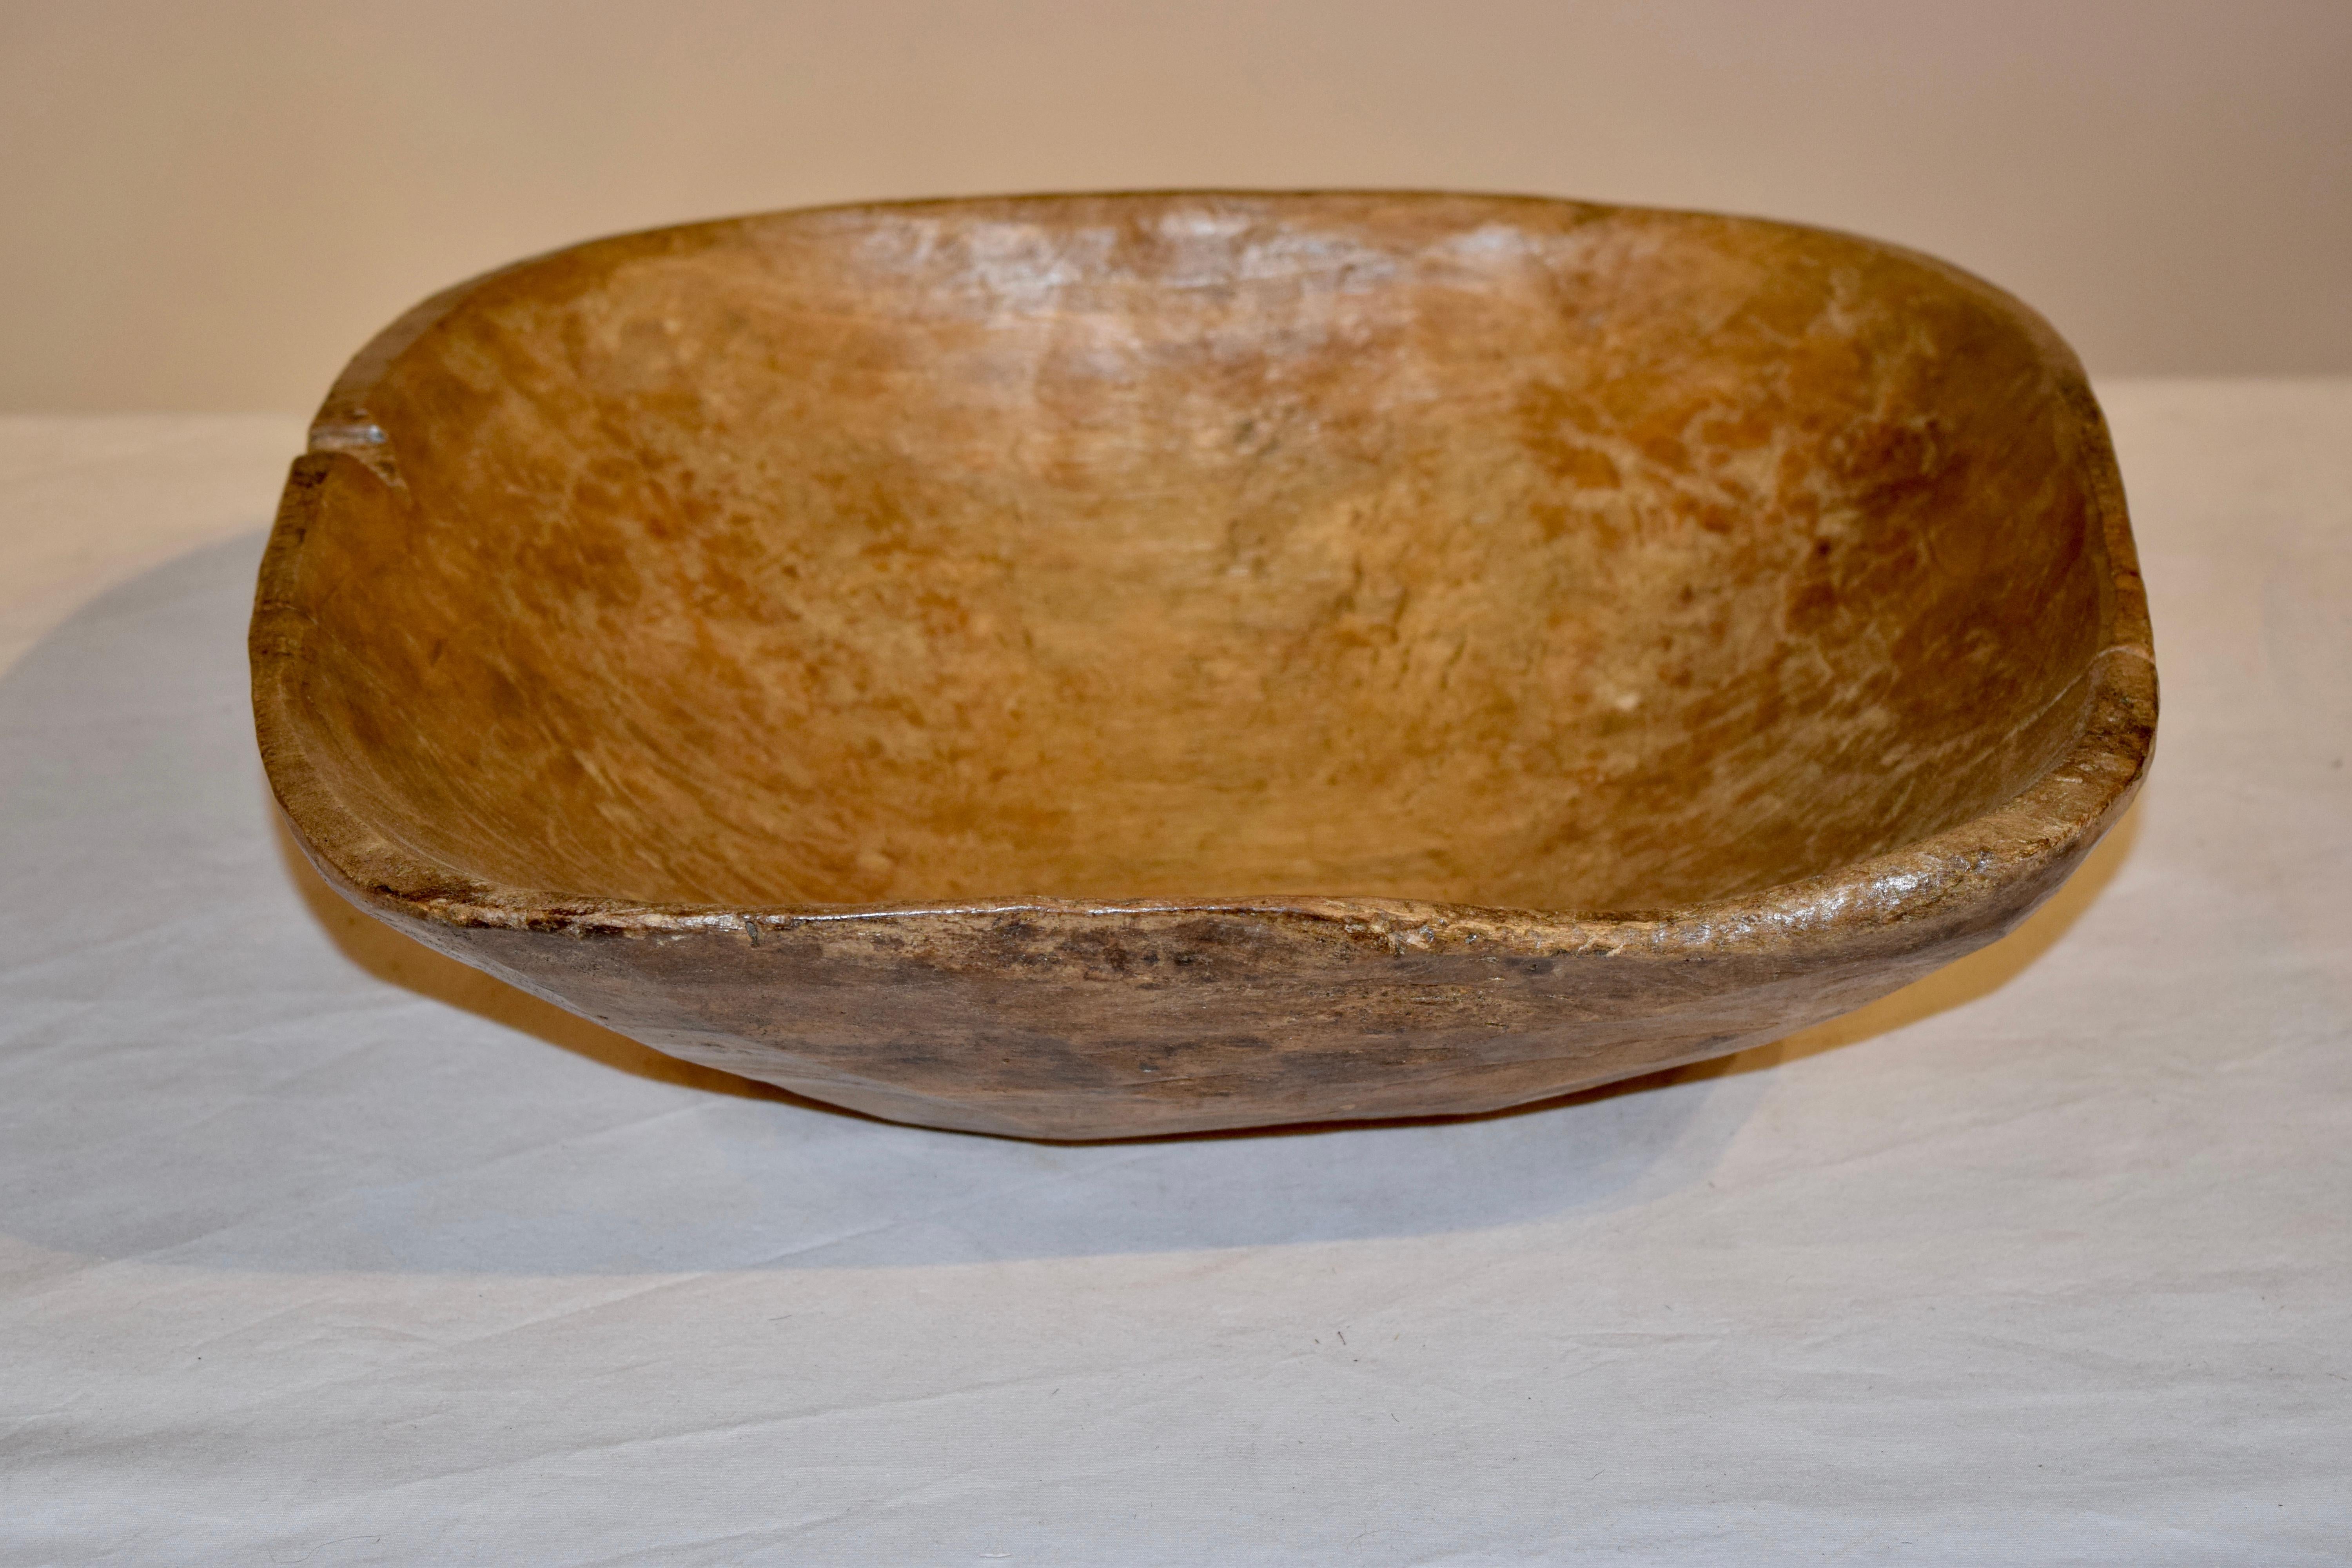 19th century dough bowl from England made from sycamore. Normal wear and shrinkage from age and use.